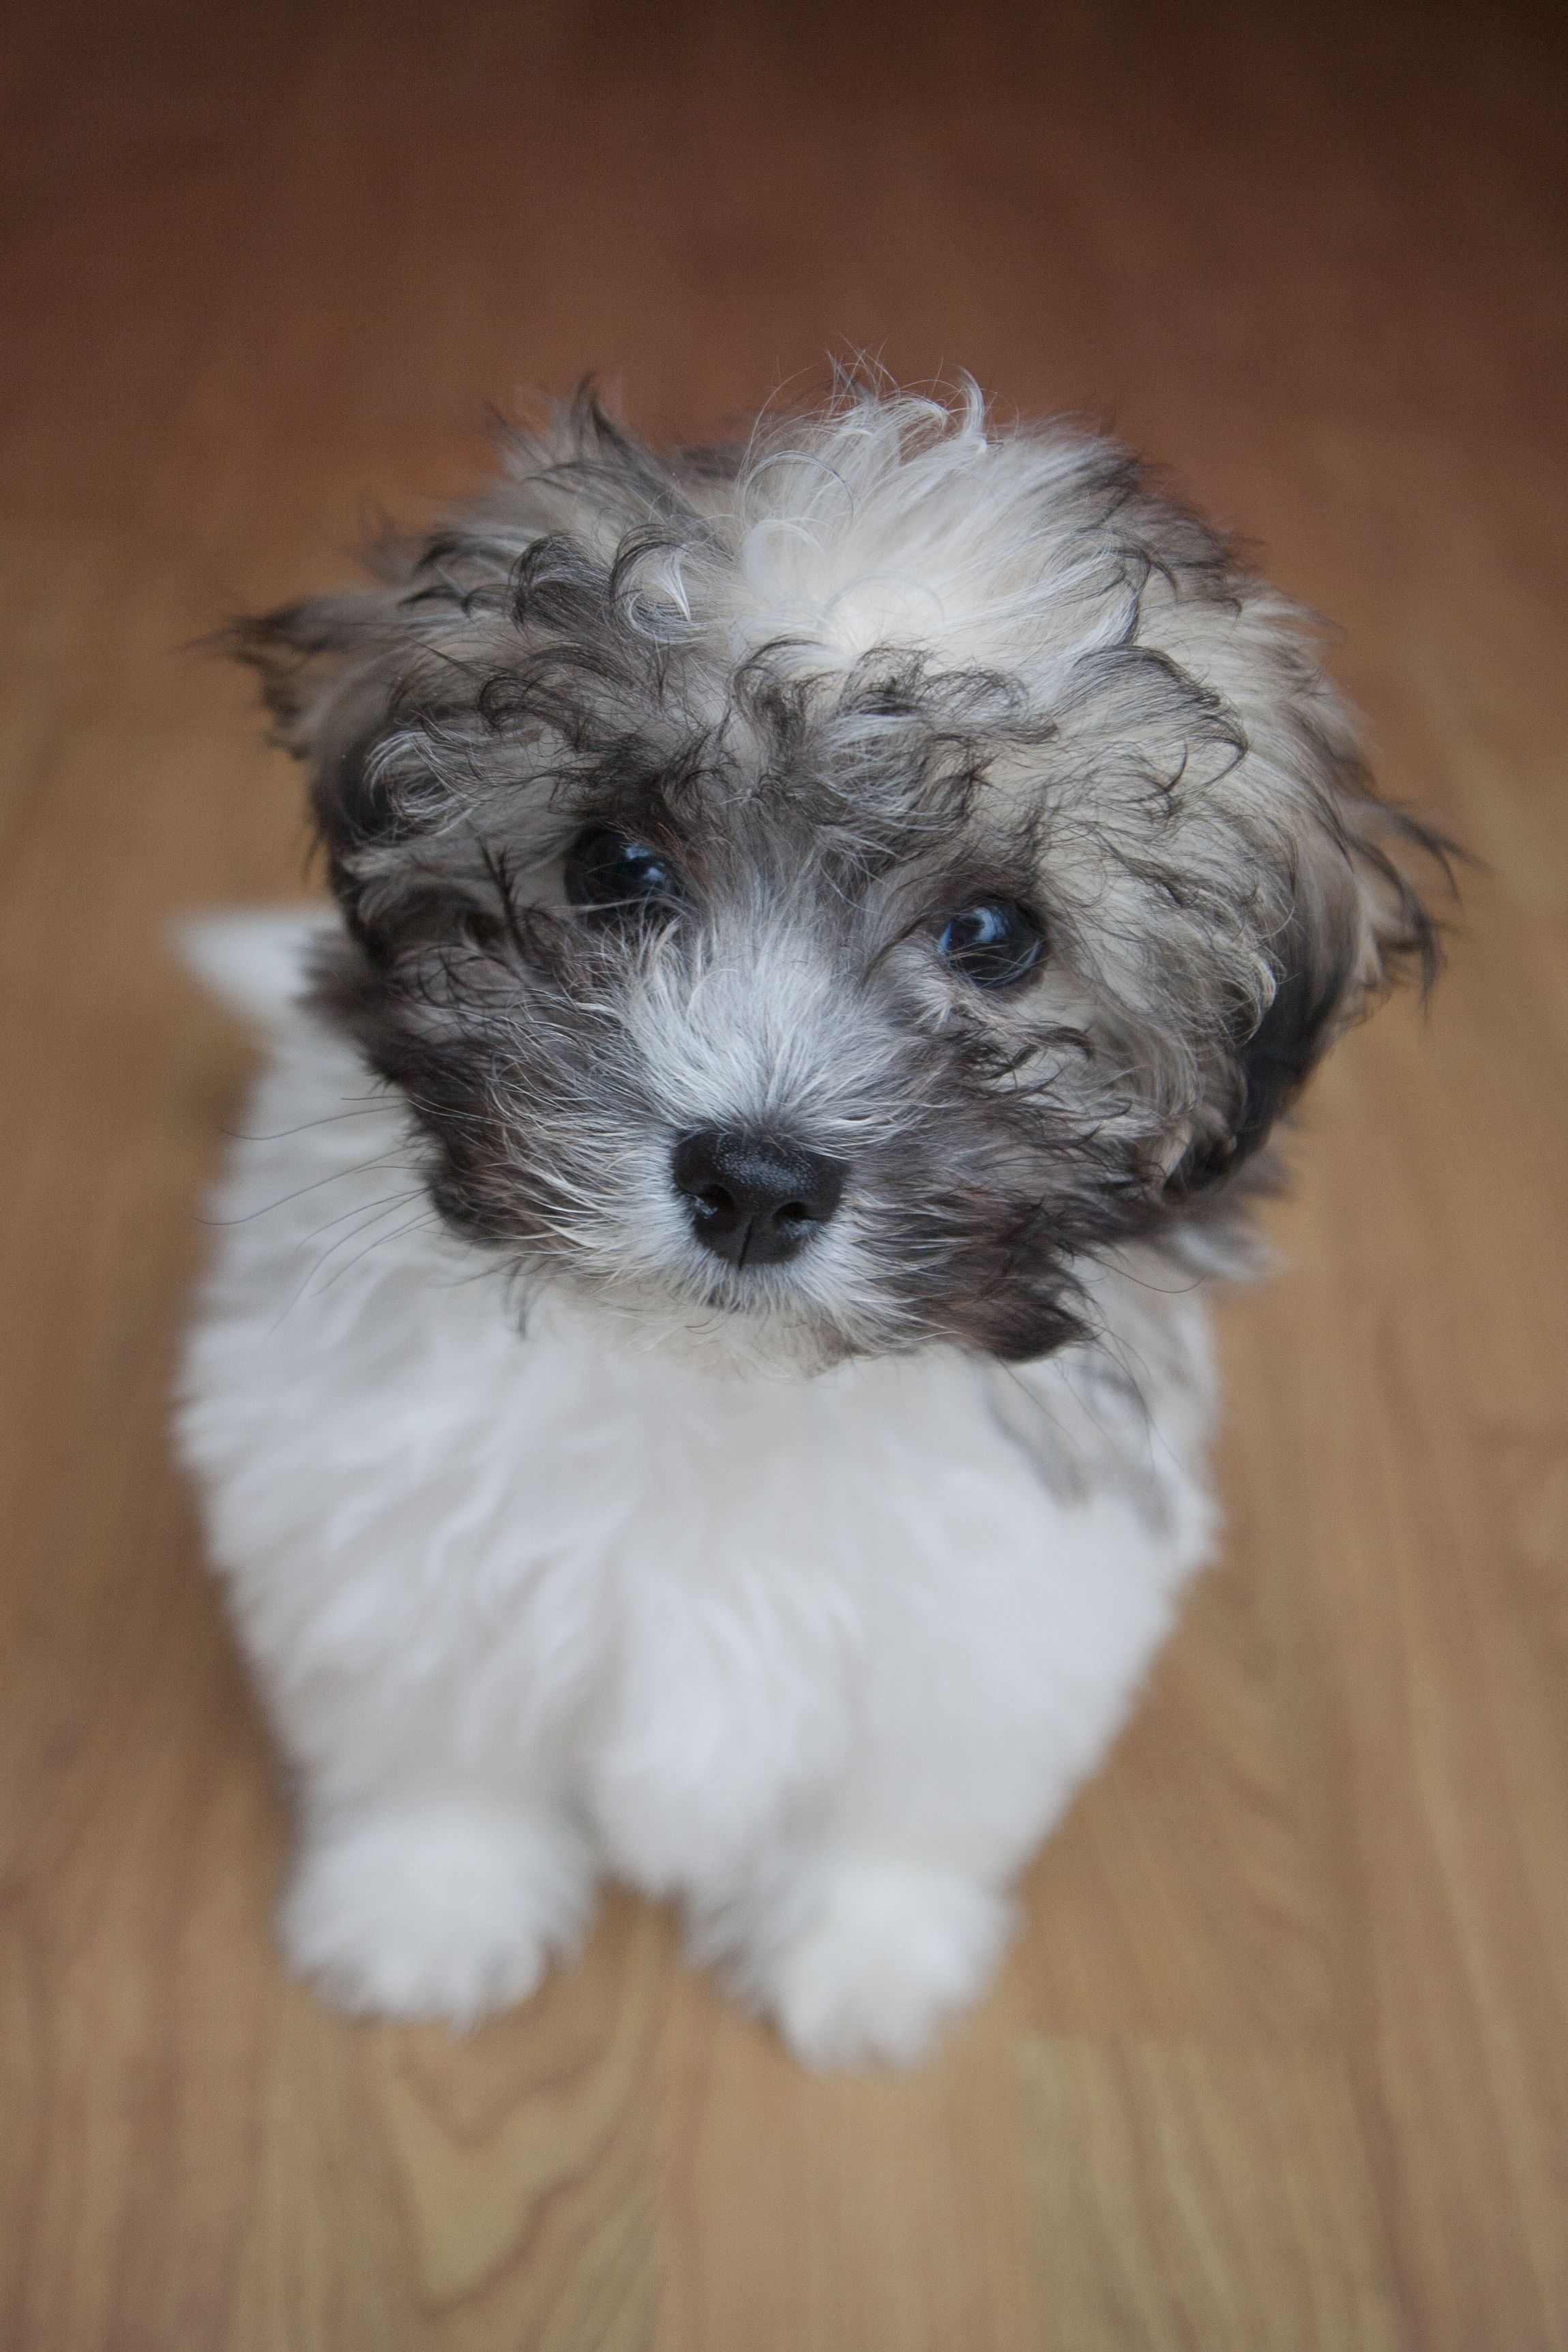 15 Teddy Bear Dog Breeds Morki Schnoodle And More